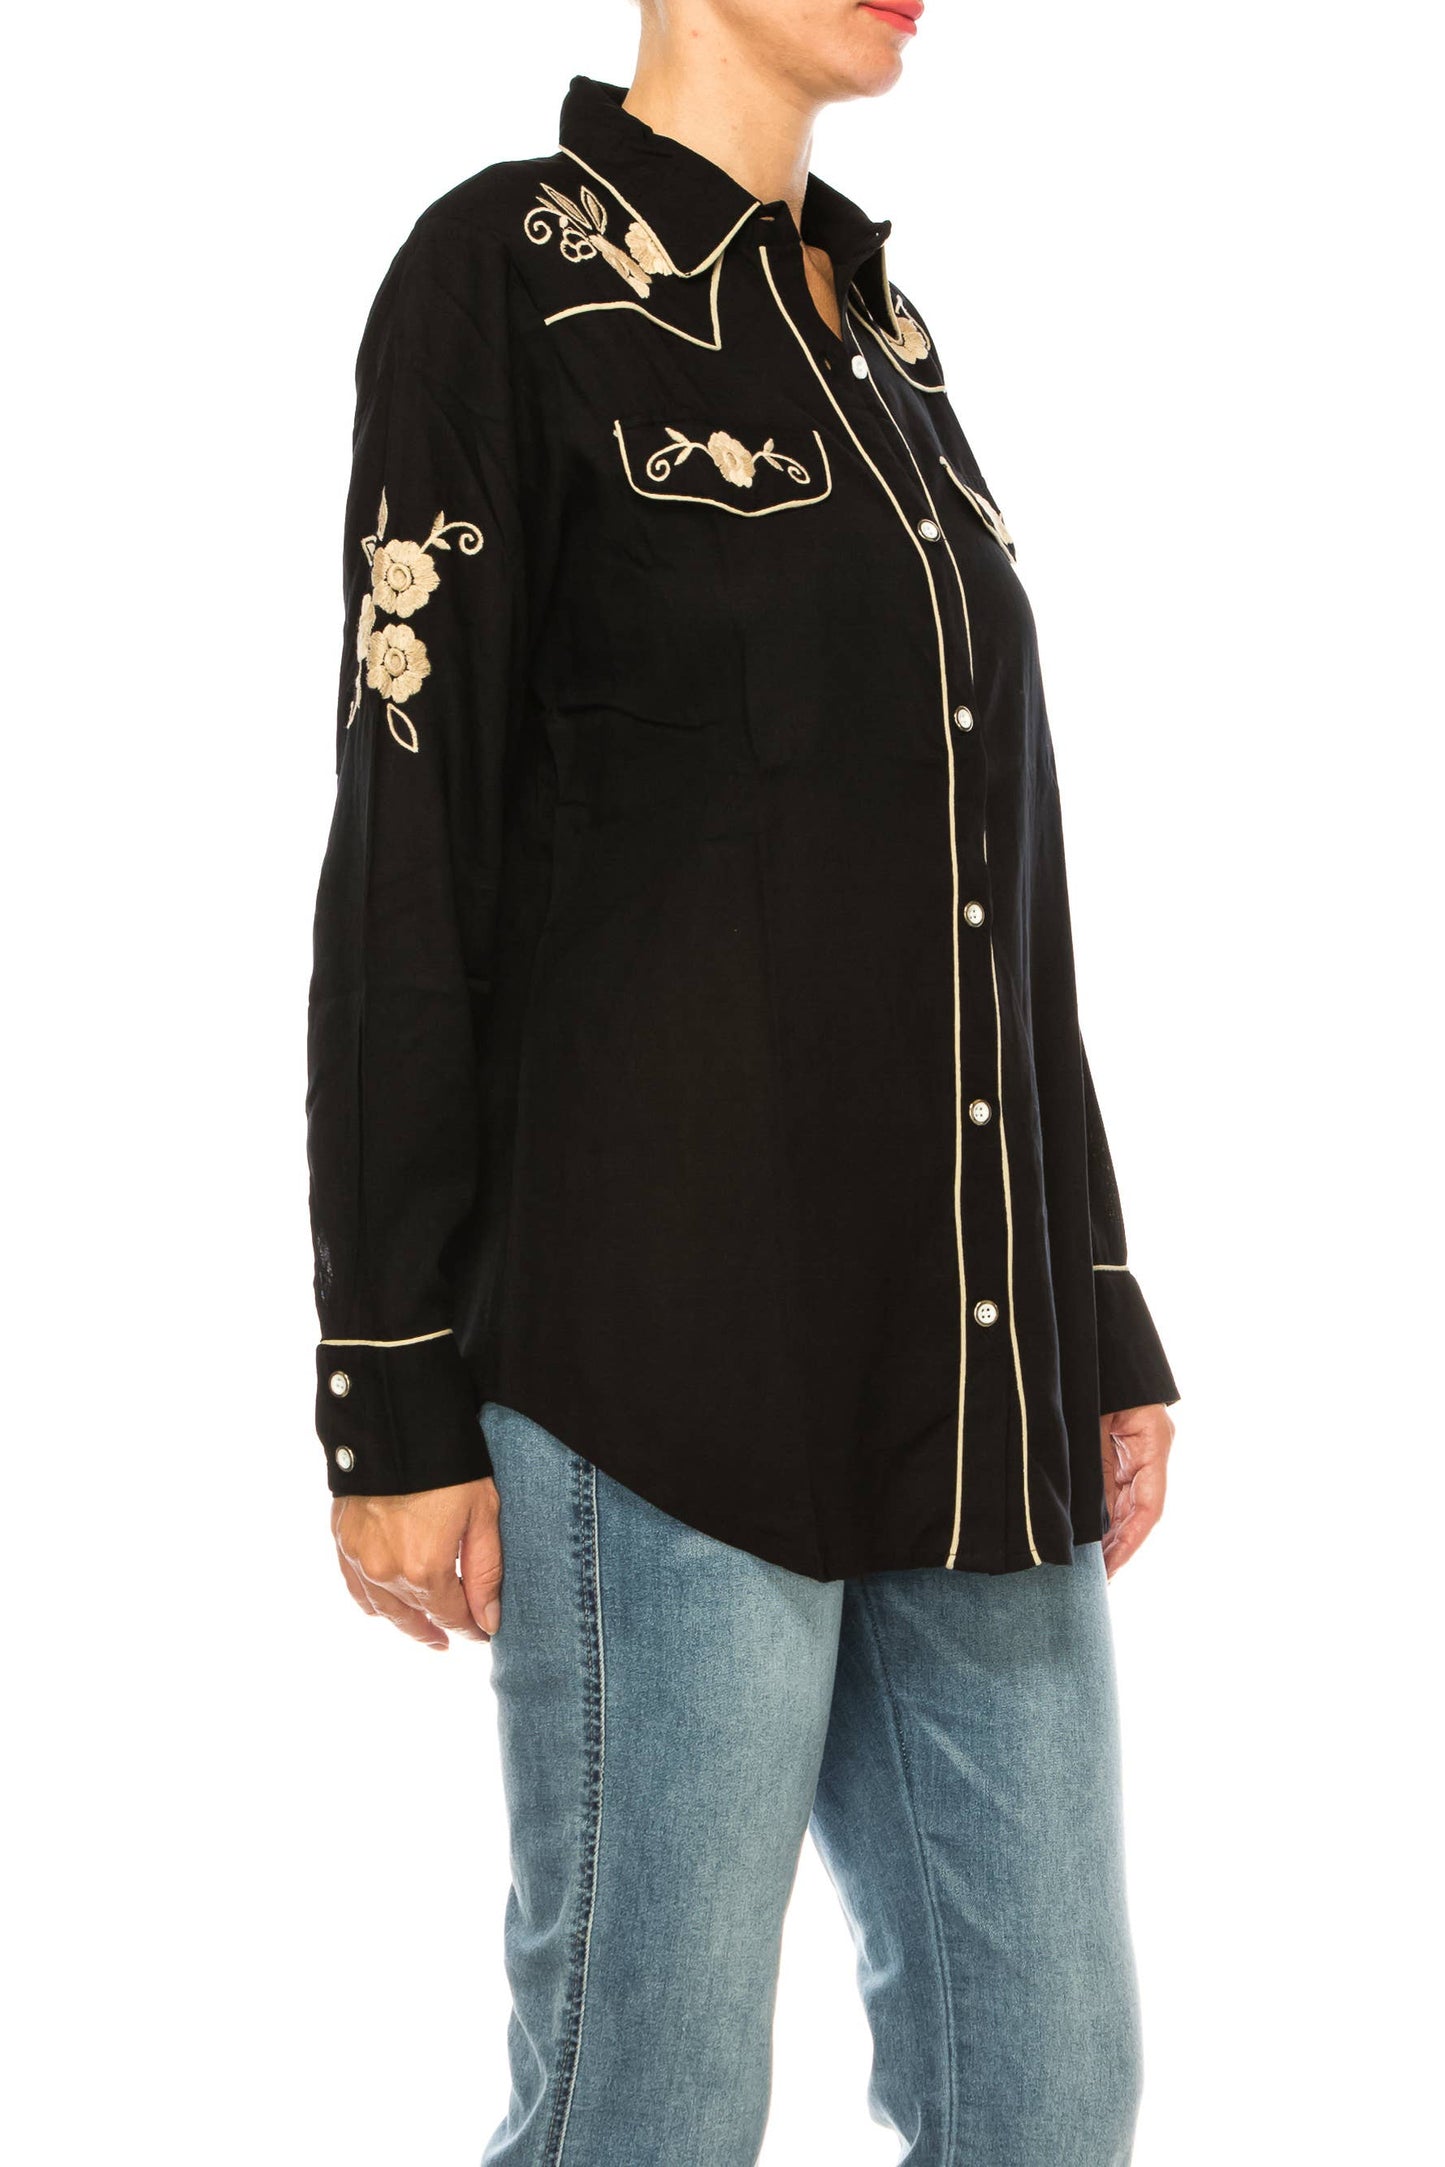 Magazine Clothing - Black Western Shirt with Embroidery: Small